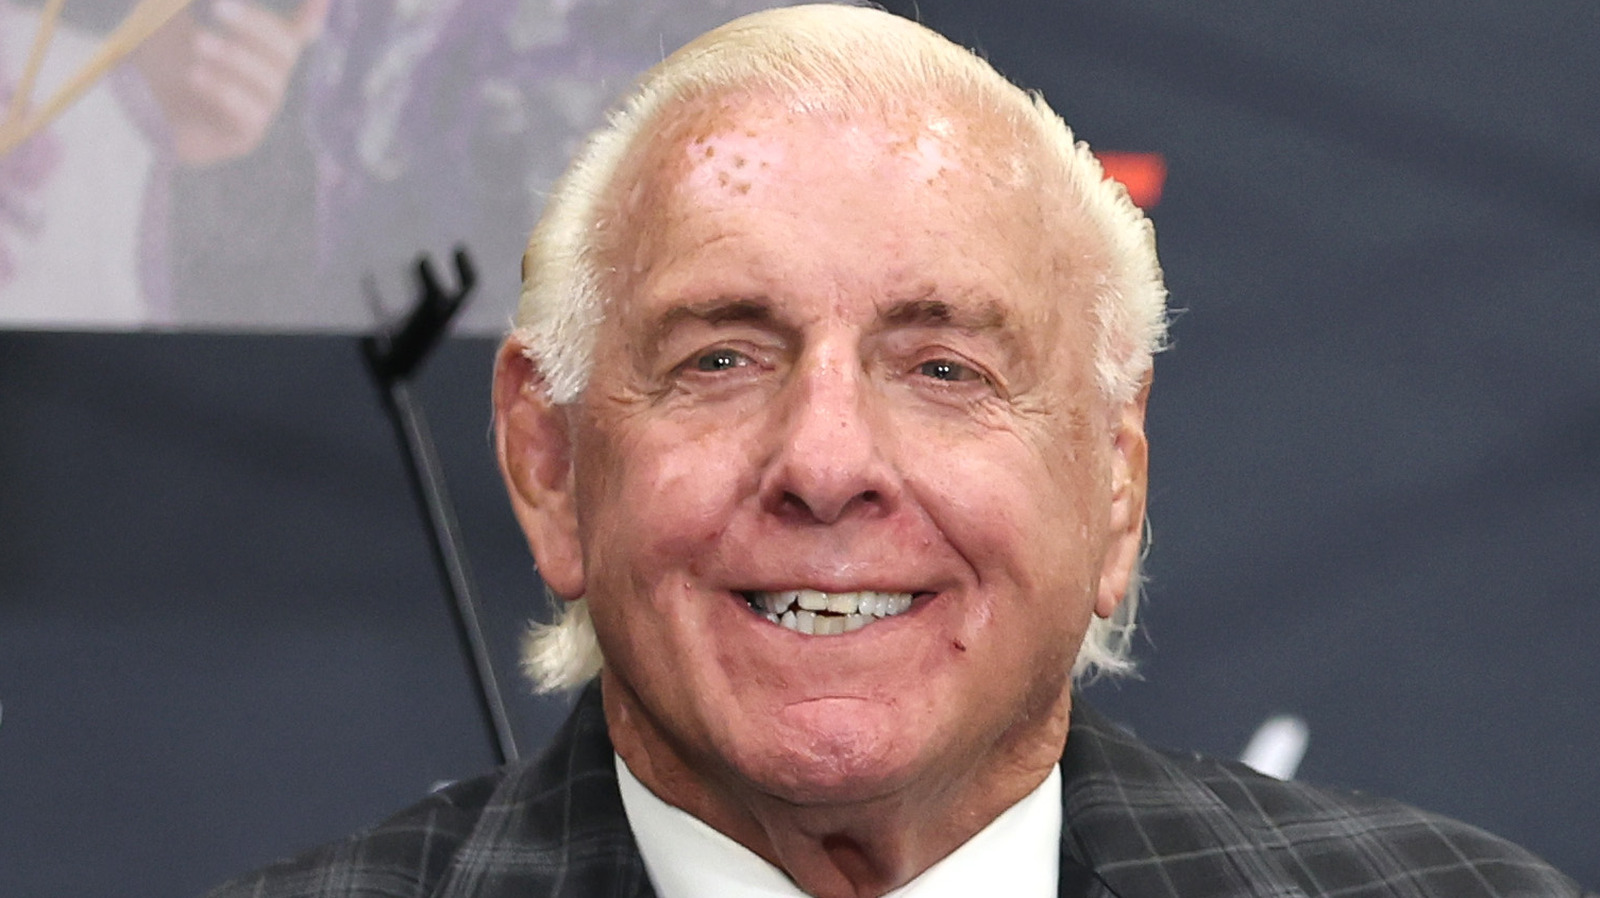 Ric Flair Reveals What Eric Bischoff Said That Upset Him